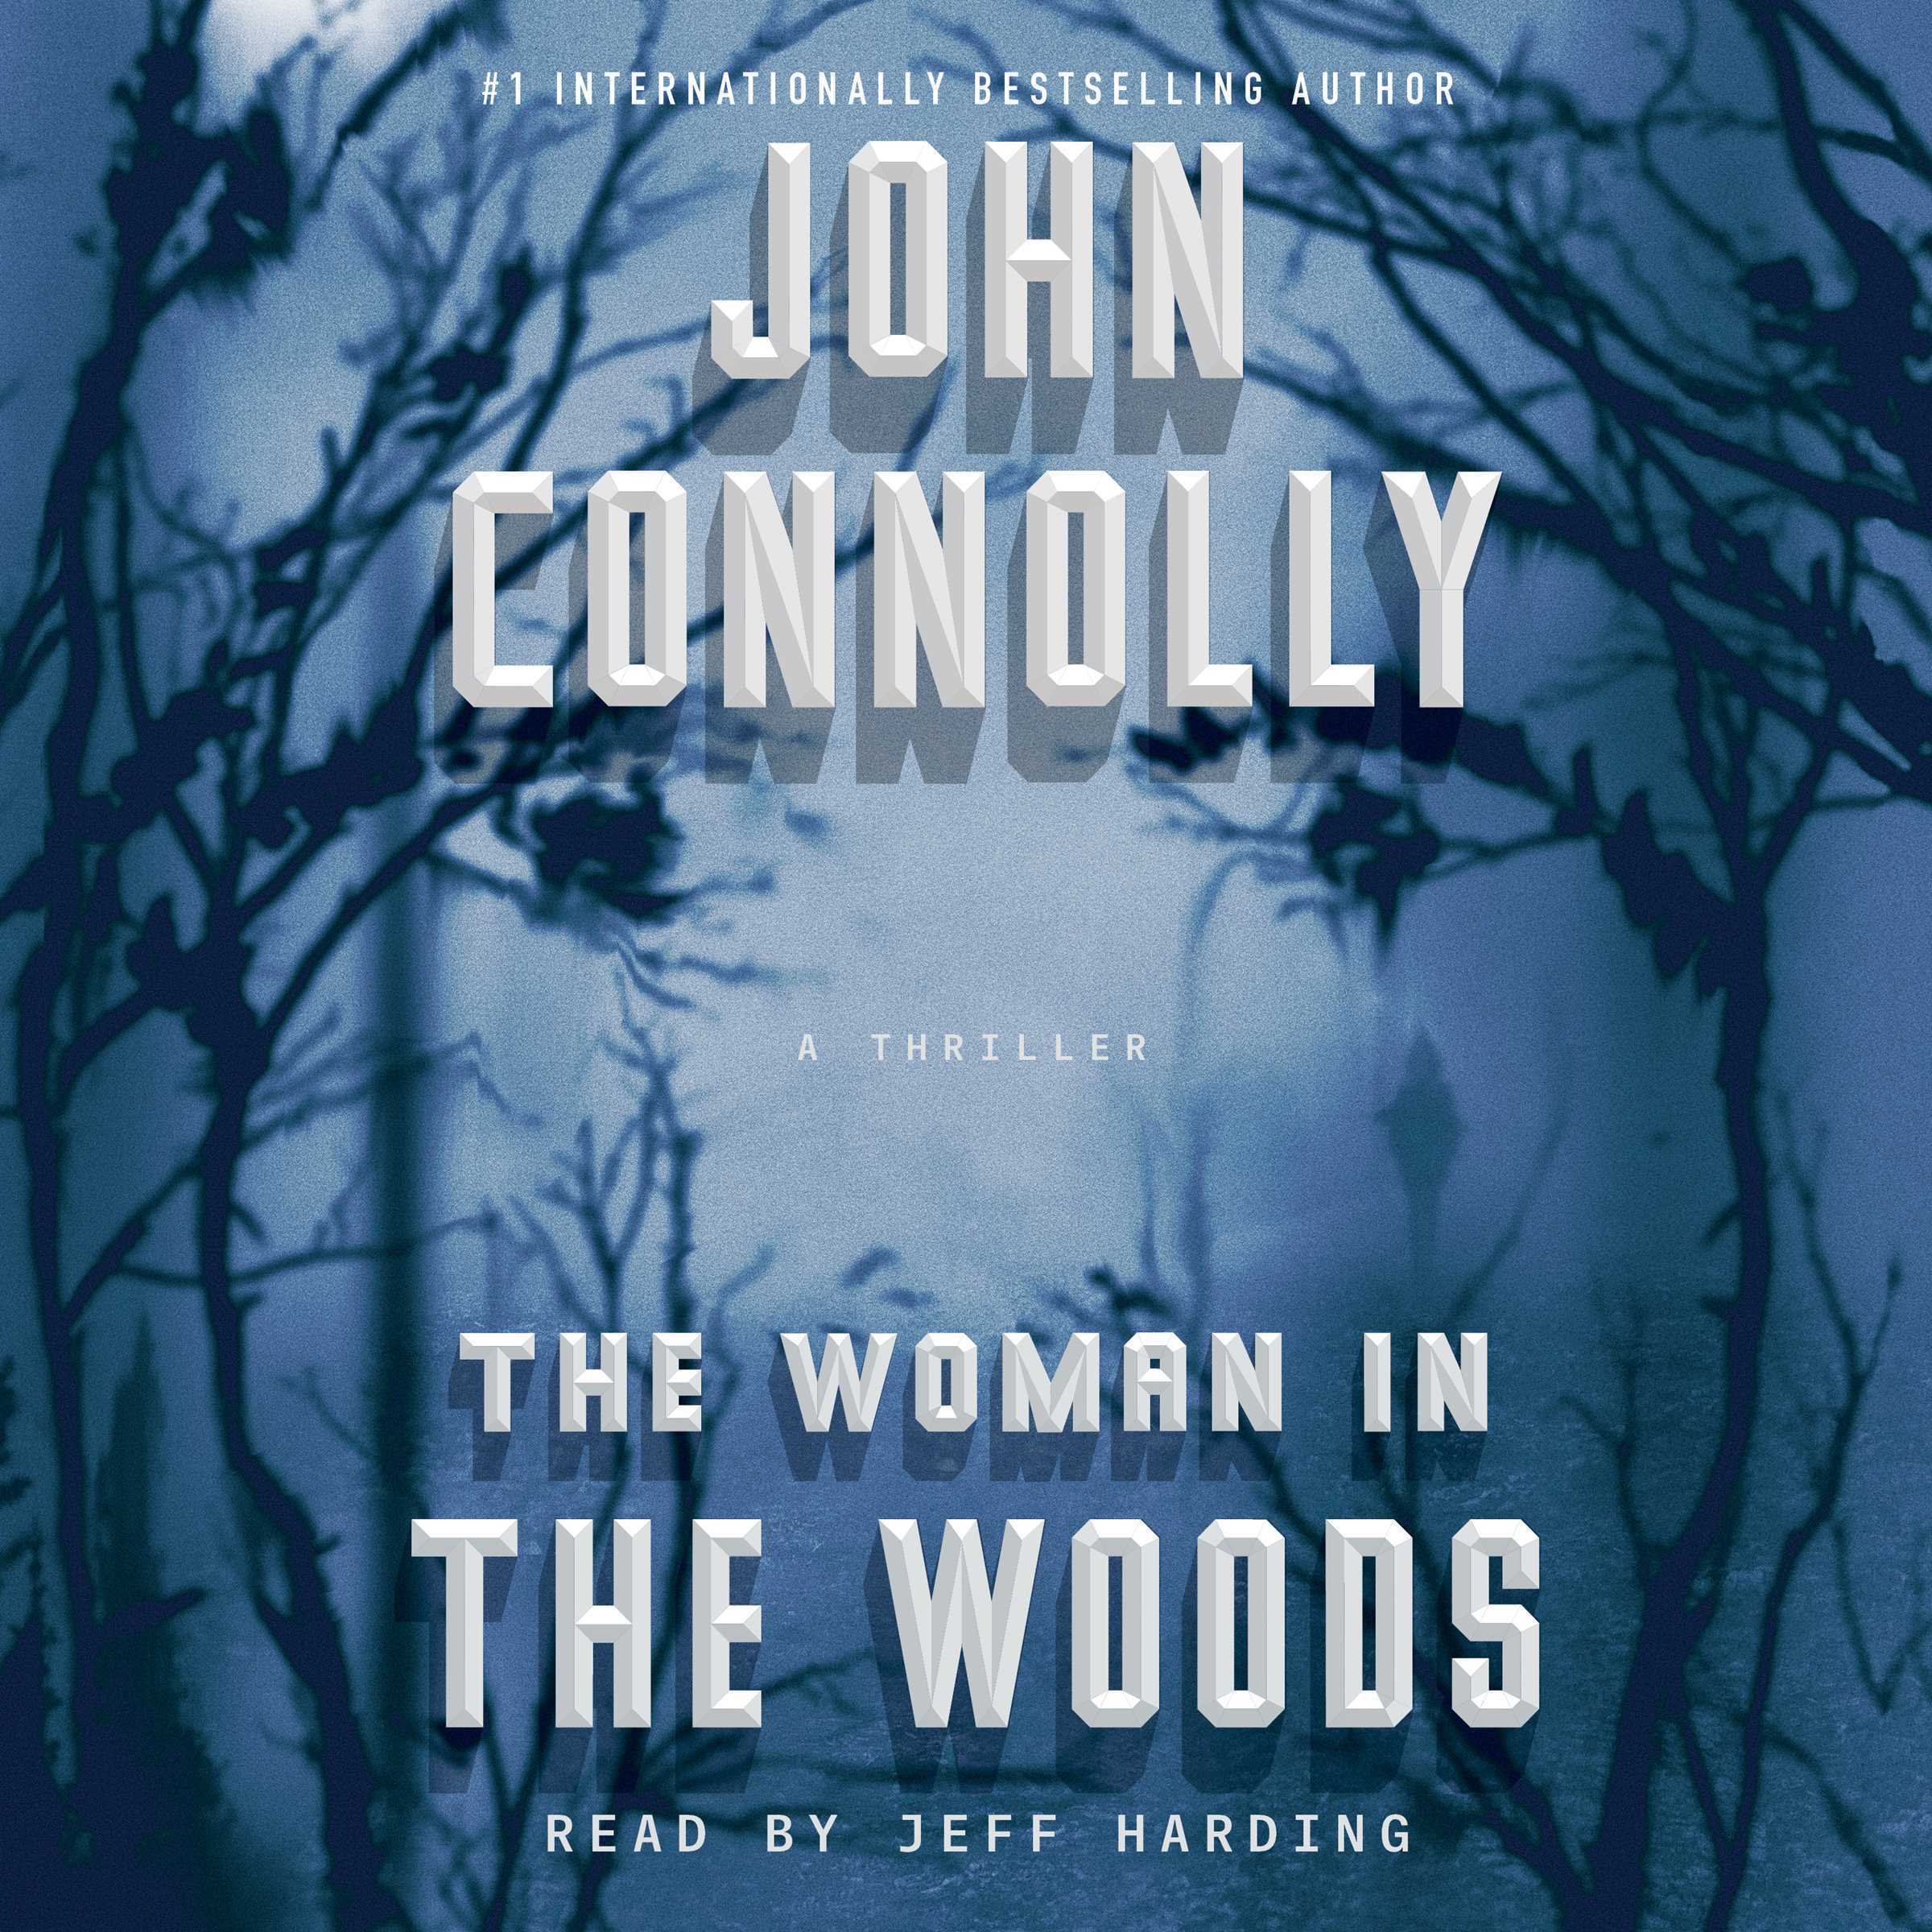 The Woman in the Woods.